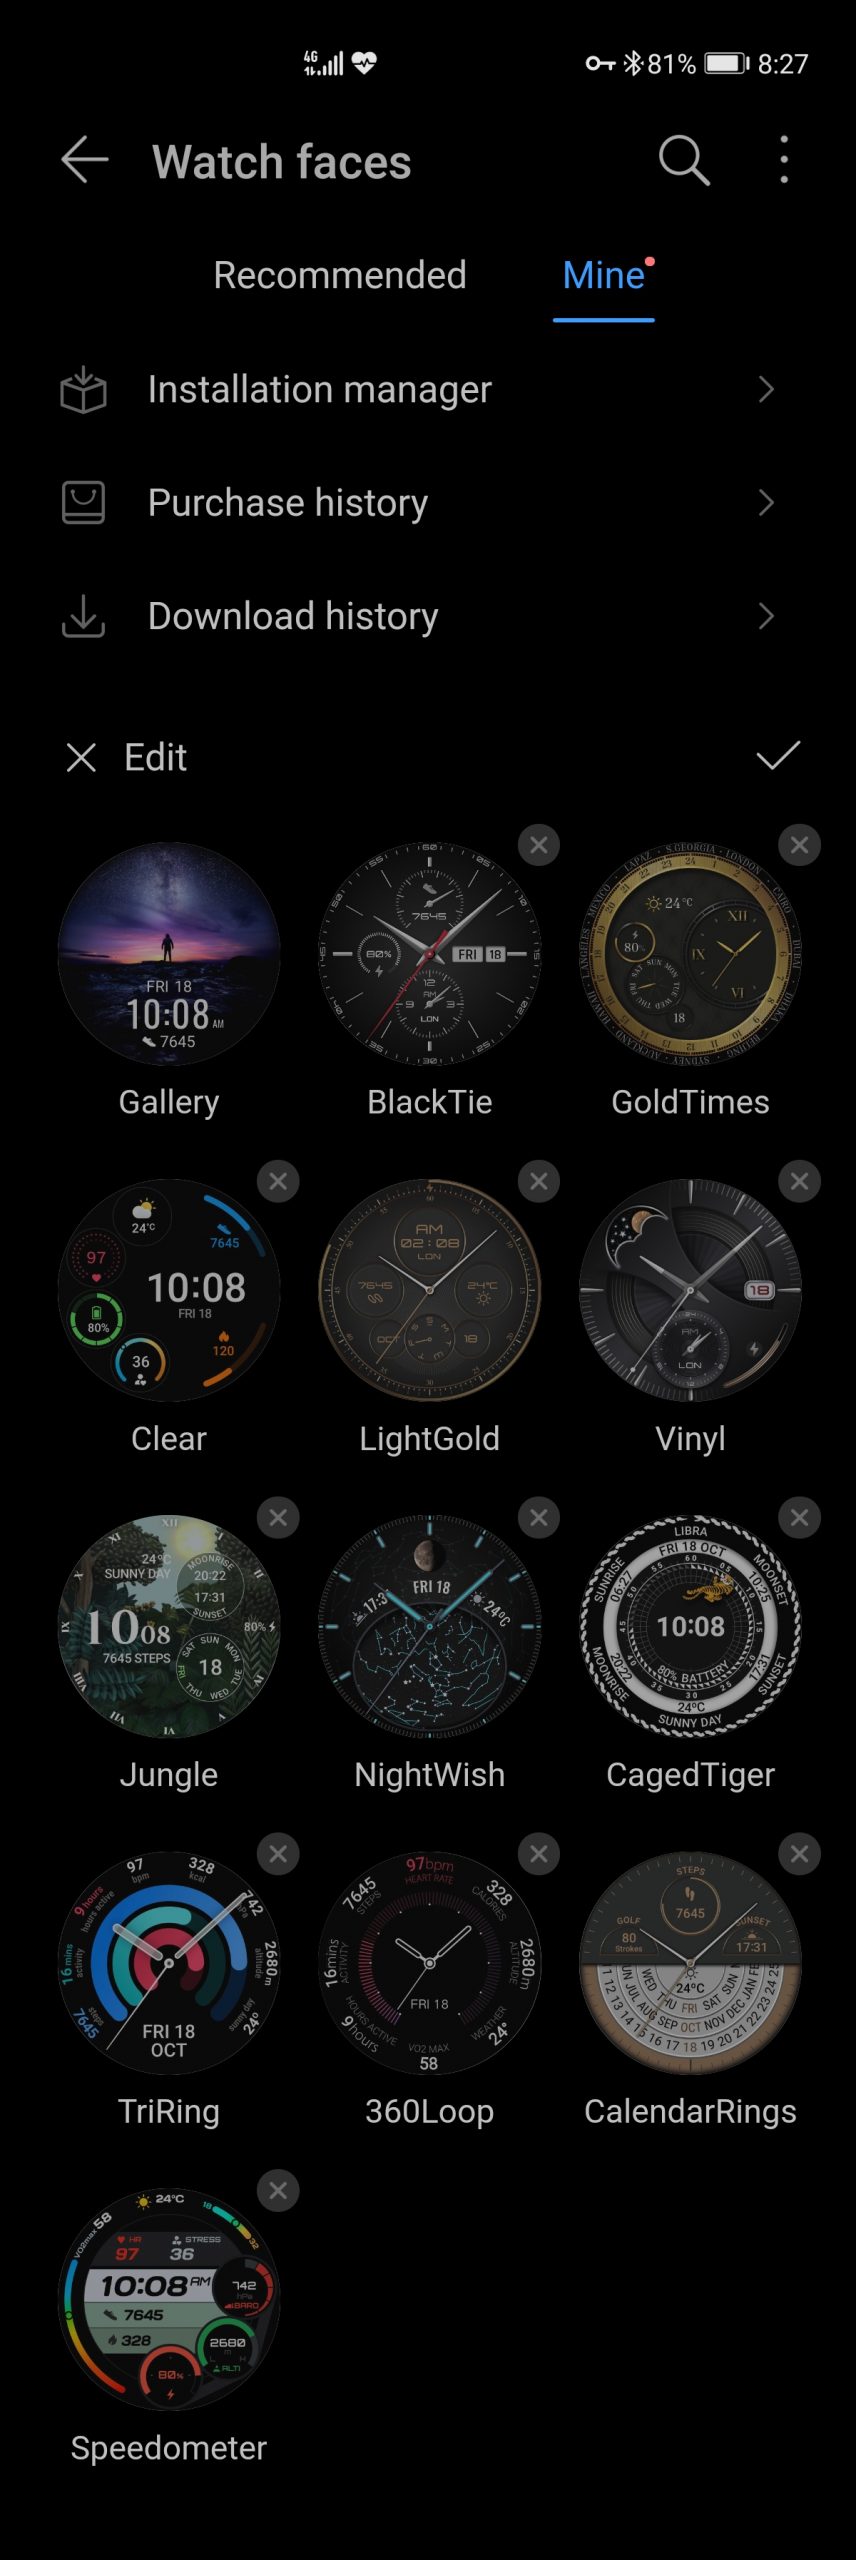 Tap Watch faces